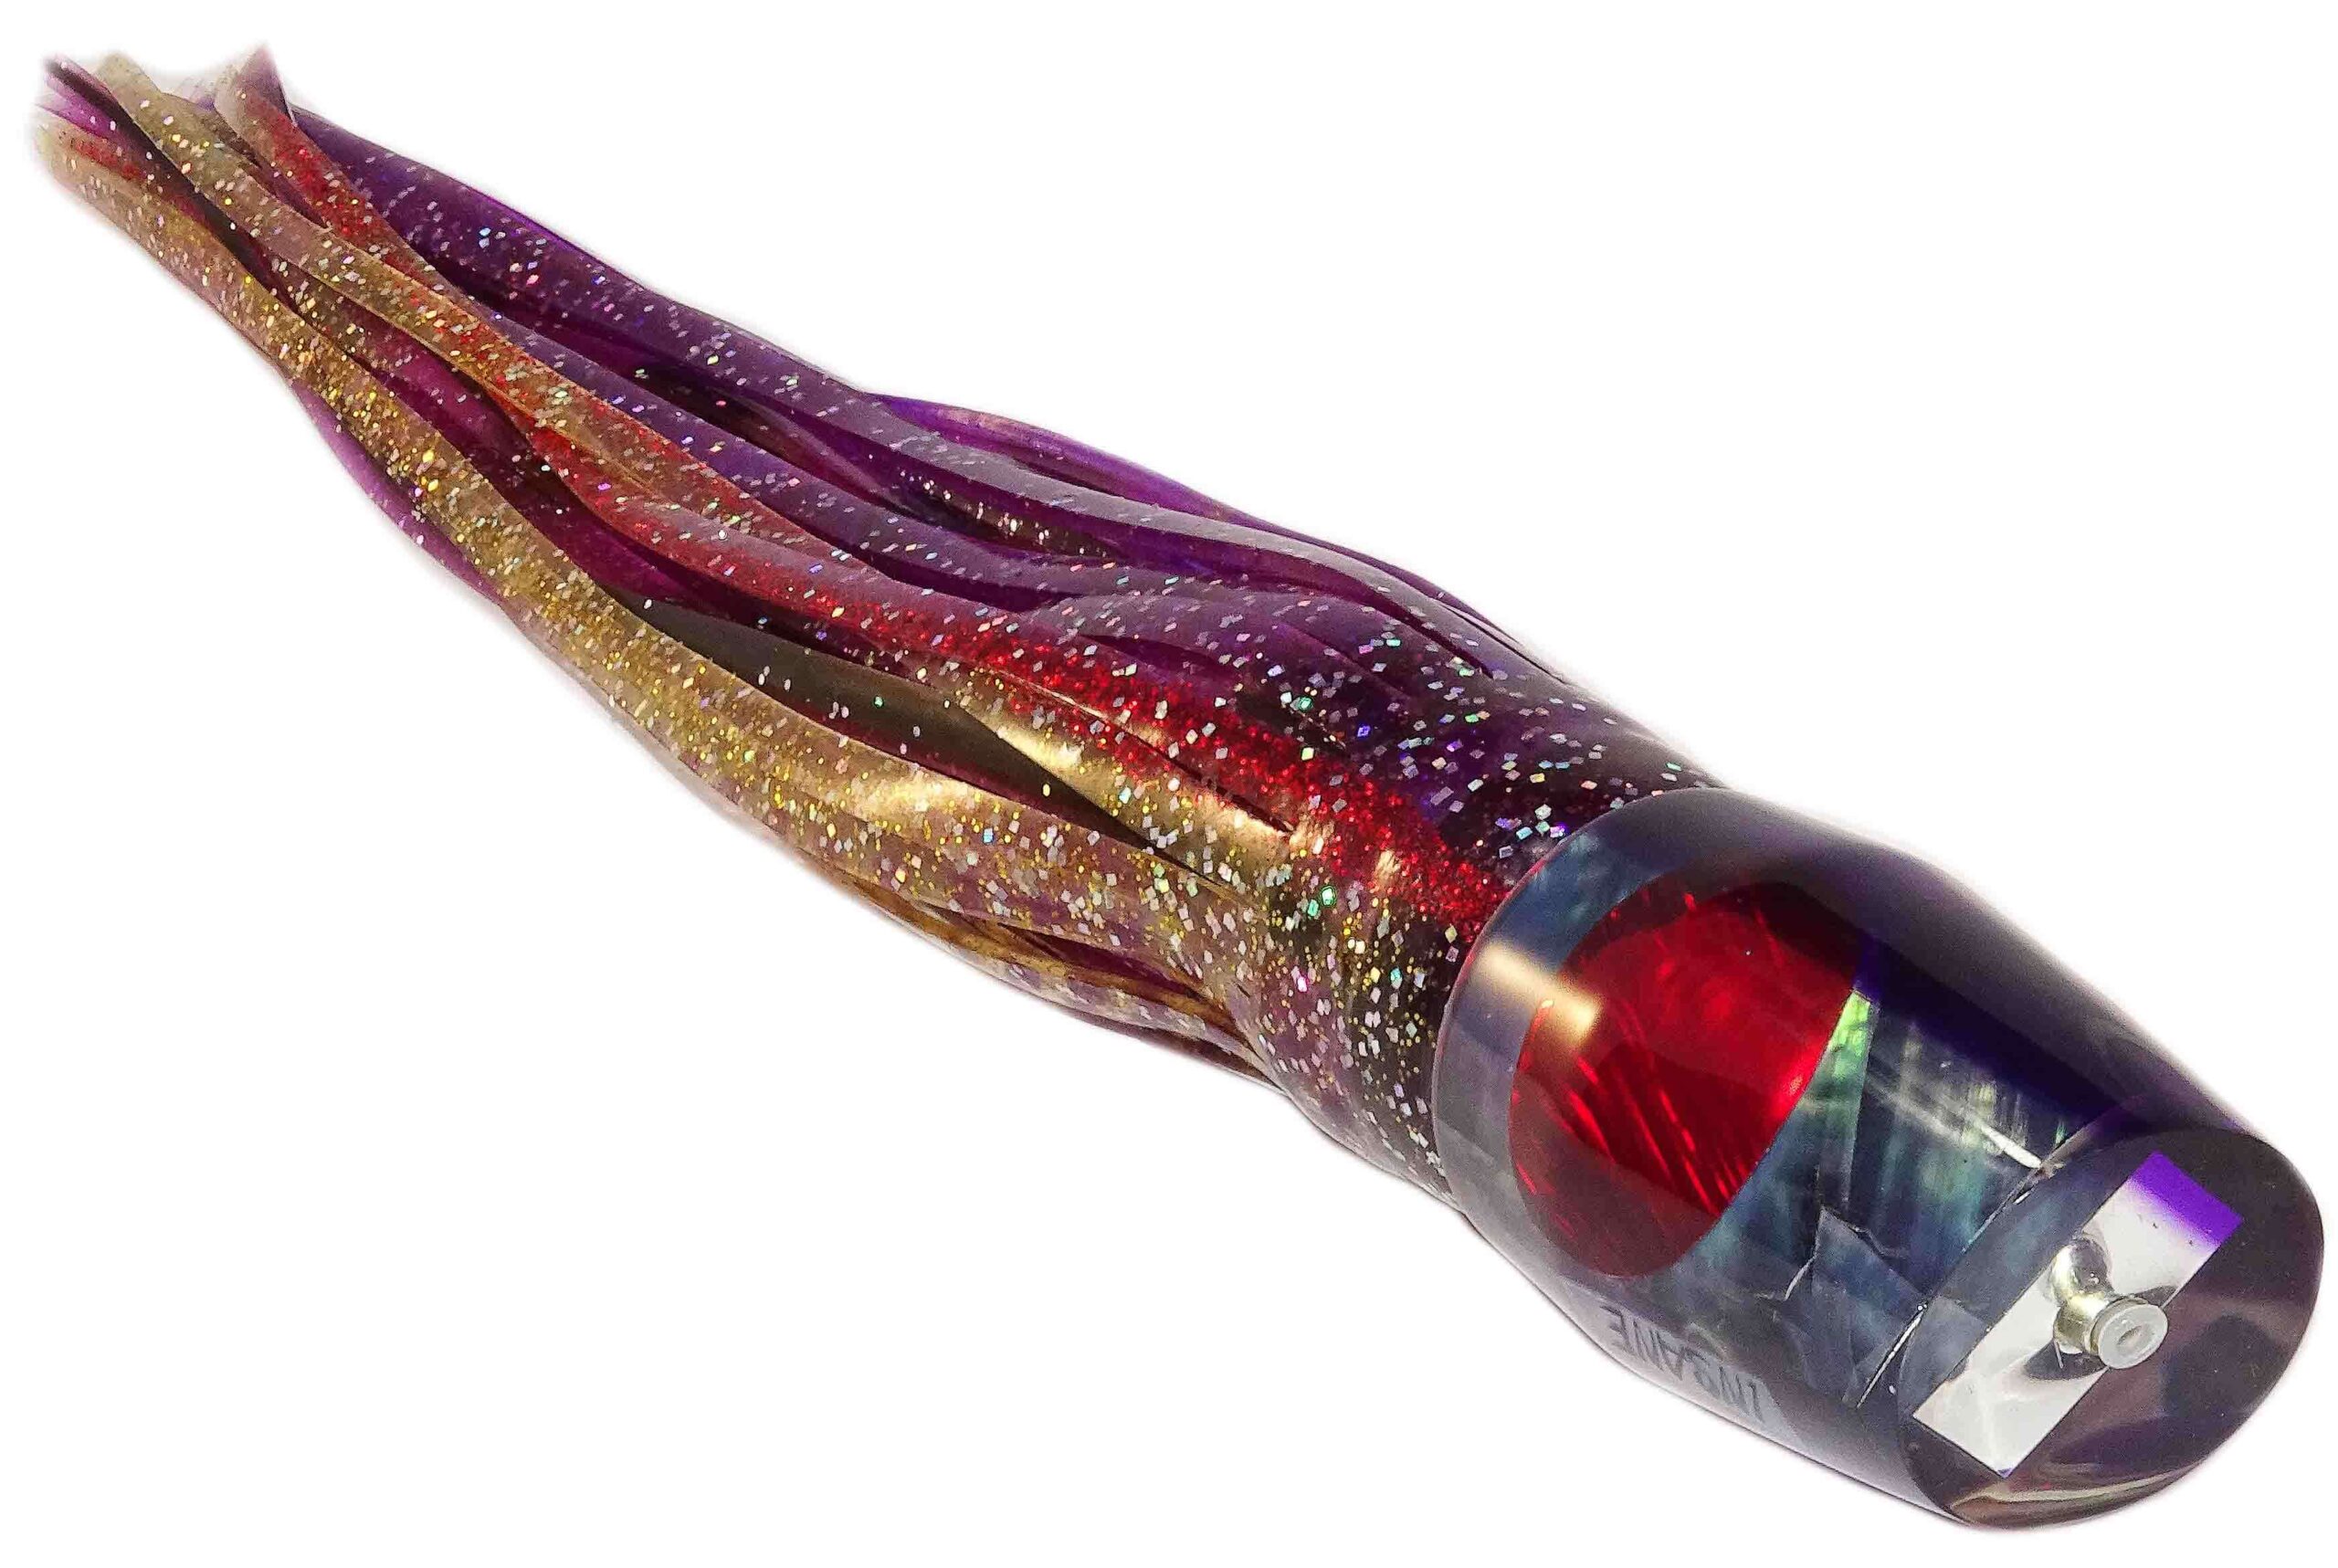 Frantic Lures - Insane Series - Skirted - Purple Tint with Shell - Santiago's Choice